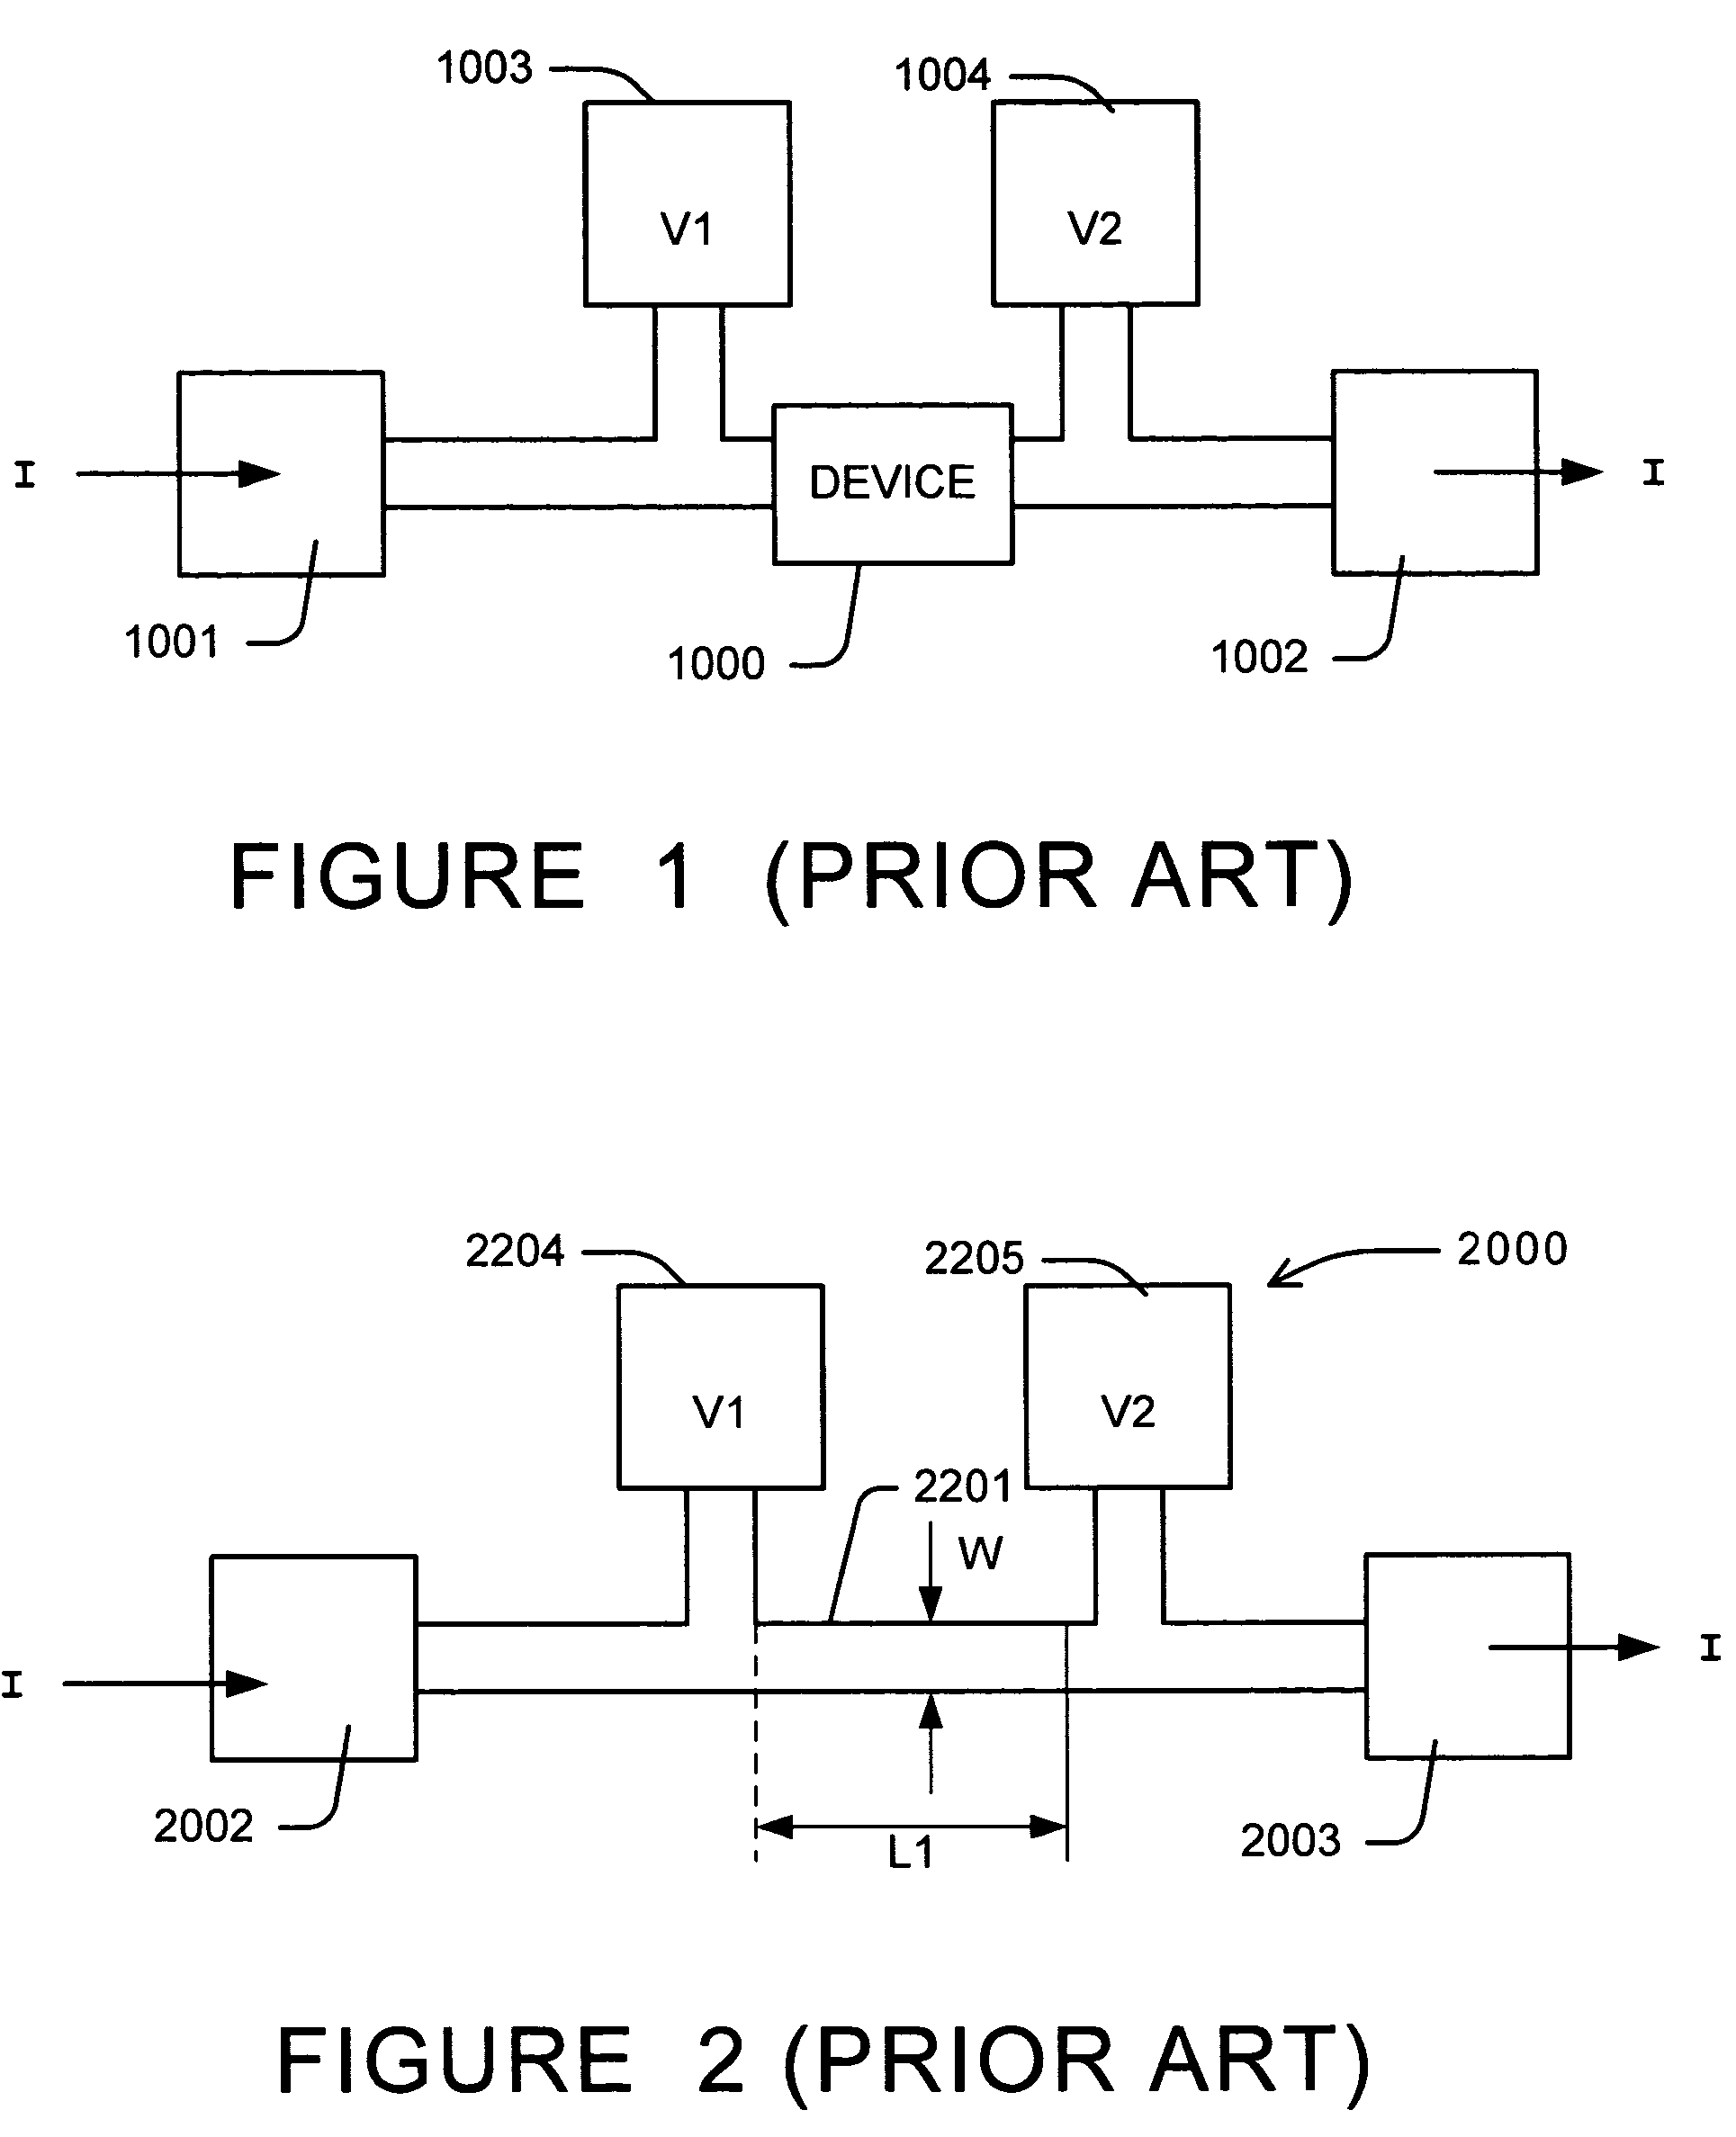 Method for detecting and monitoring defects